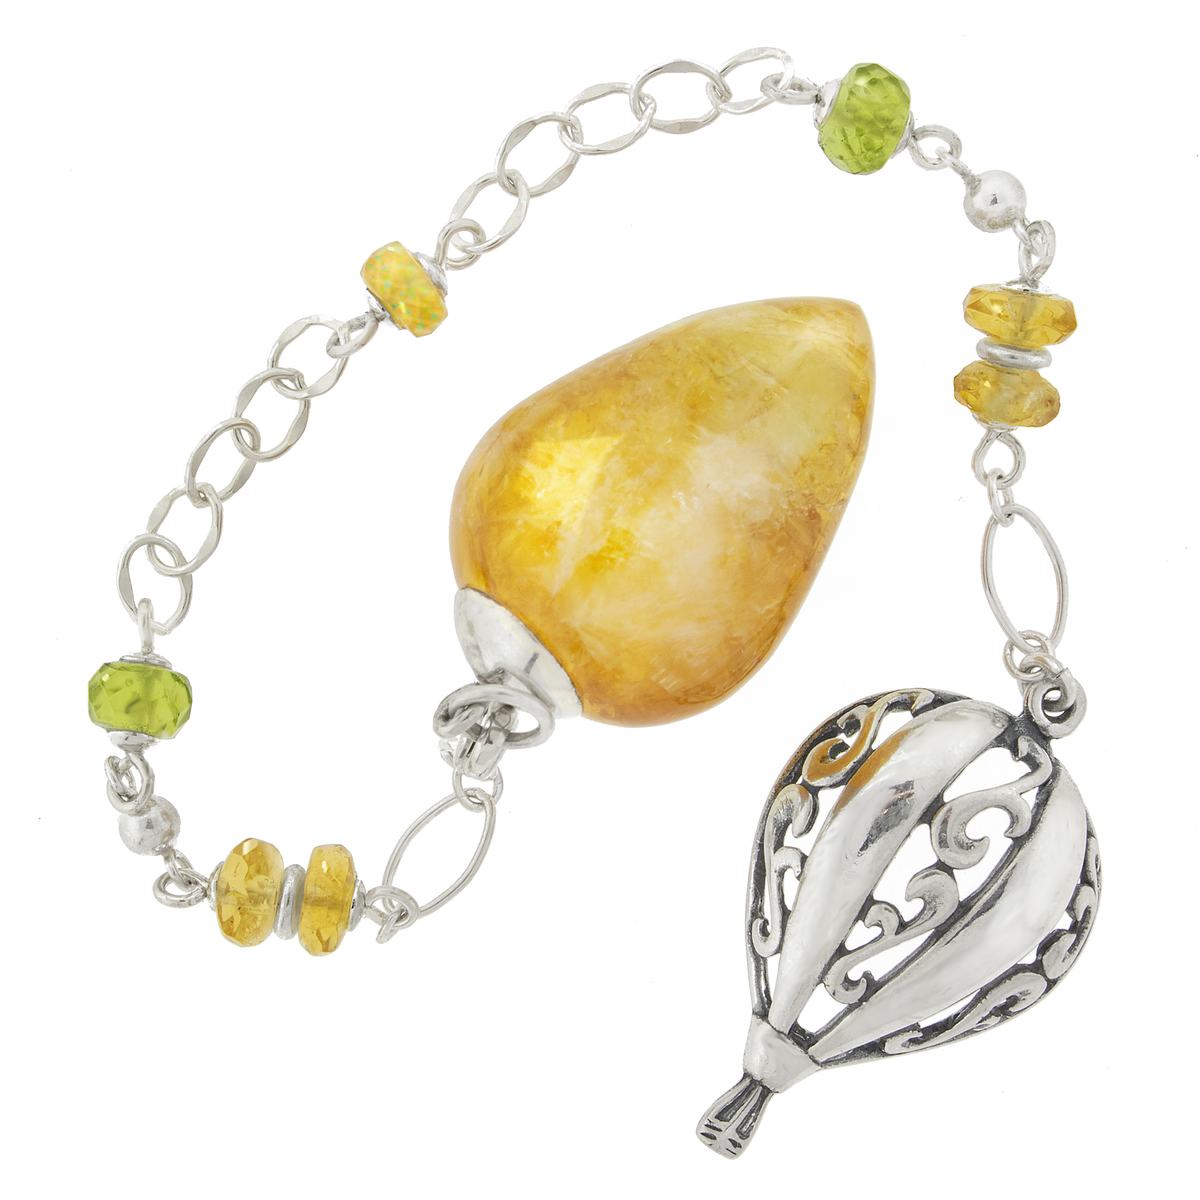 One of a Kind #397 - Citrine, Peridot and Sterling Silver Pendulum by Ask Your Pendulum